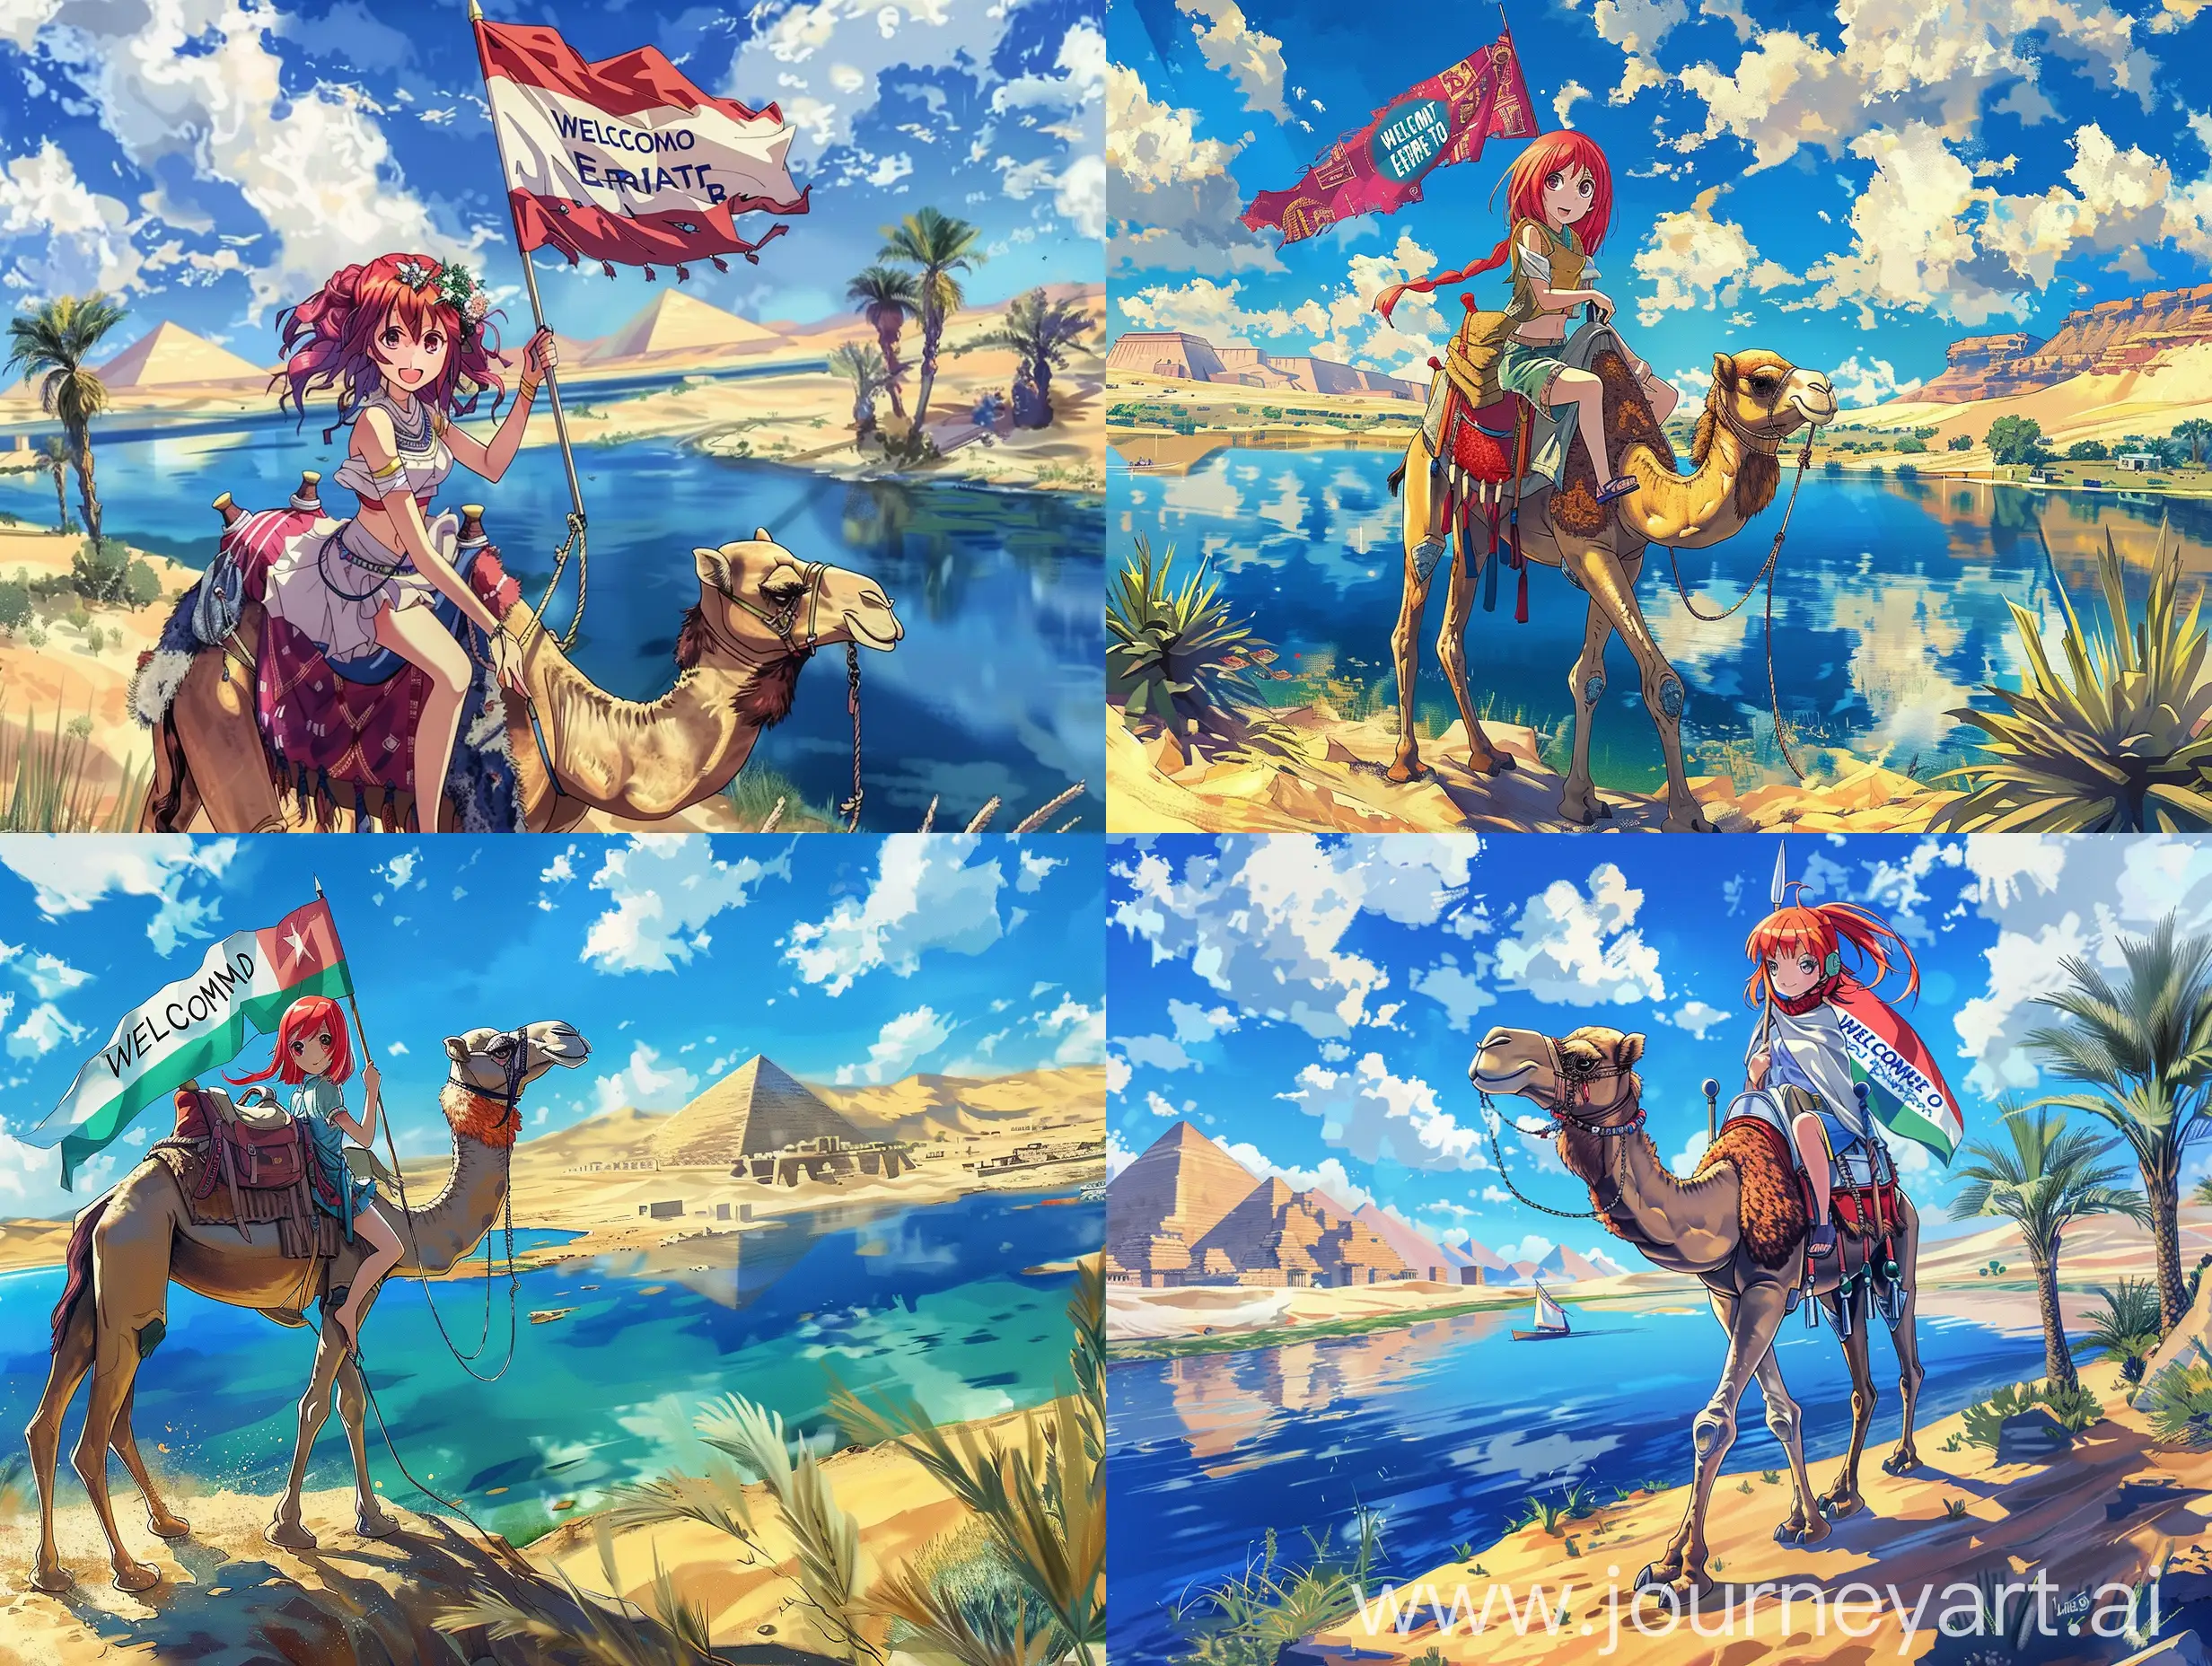 An anime girl with red hair and a beautiful expressive face rides a camel beside a lake in the desert, holding a flag that reads "Welcome to EGYPT," blending anime aesthetics.